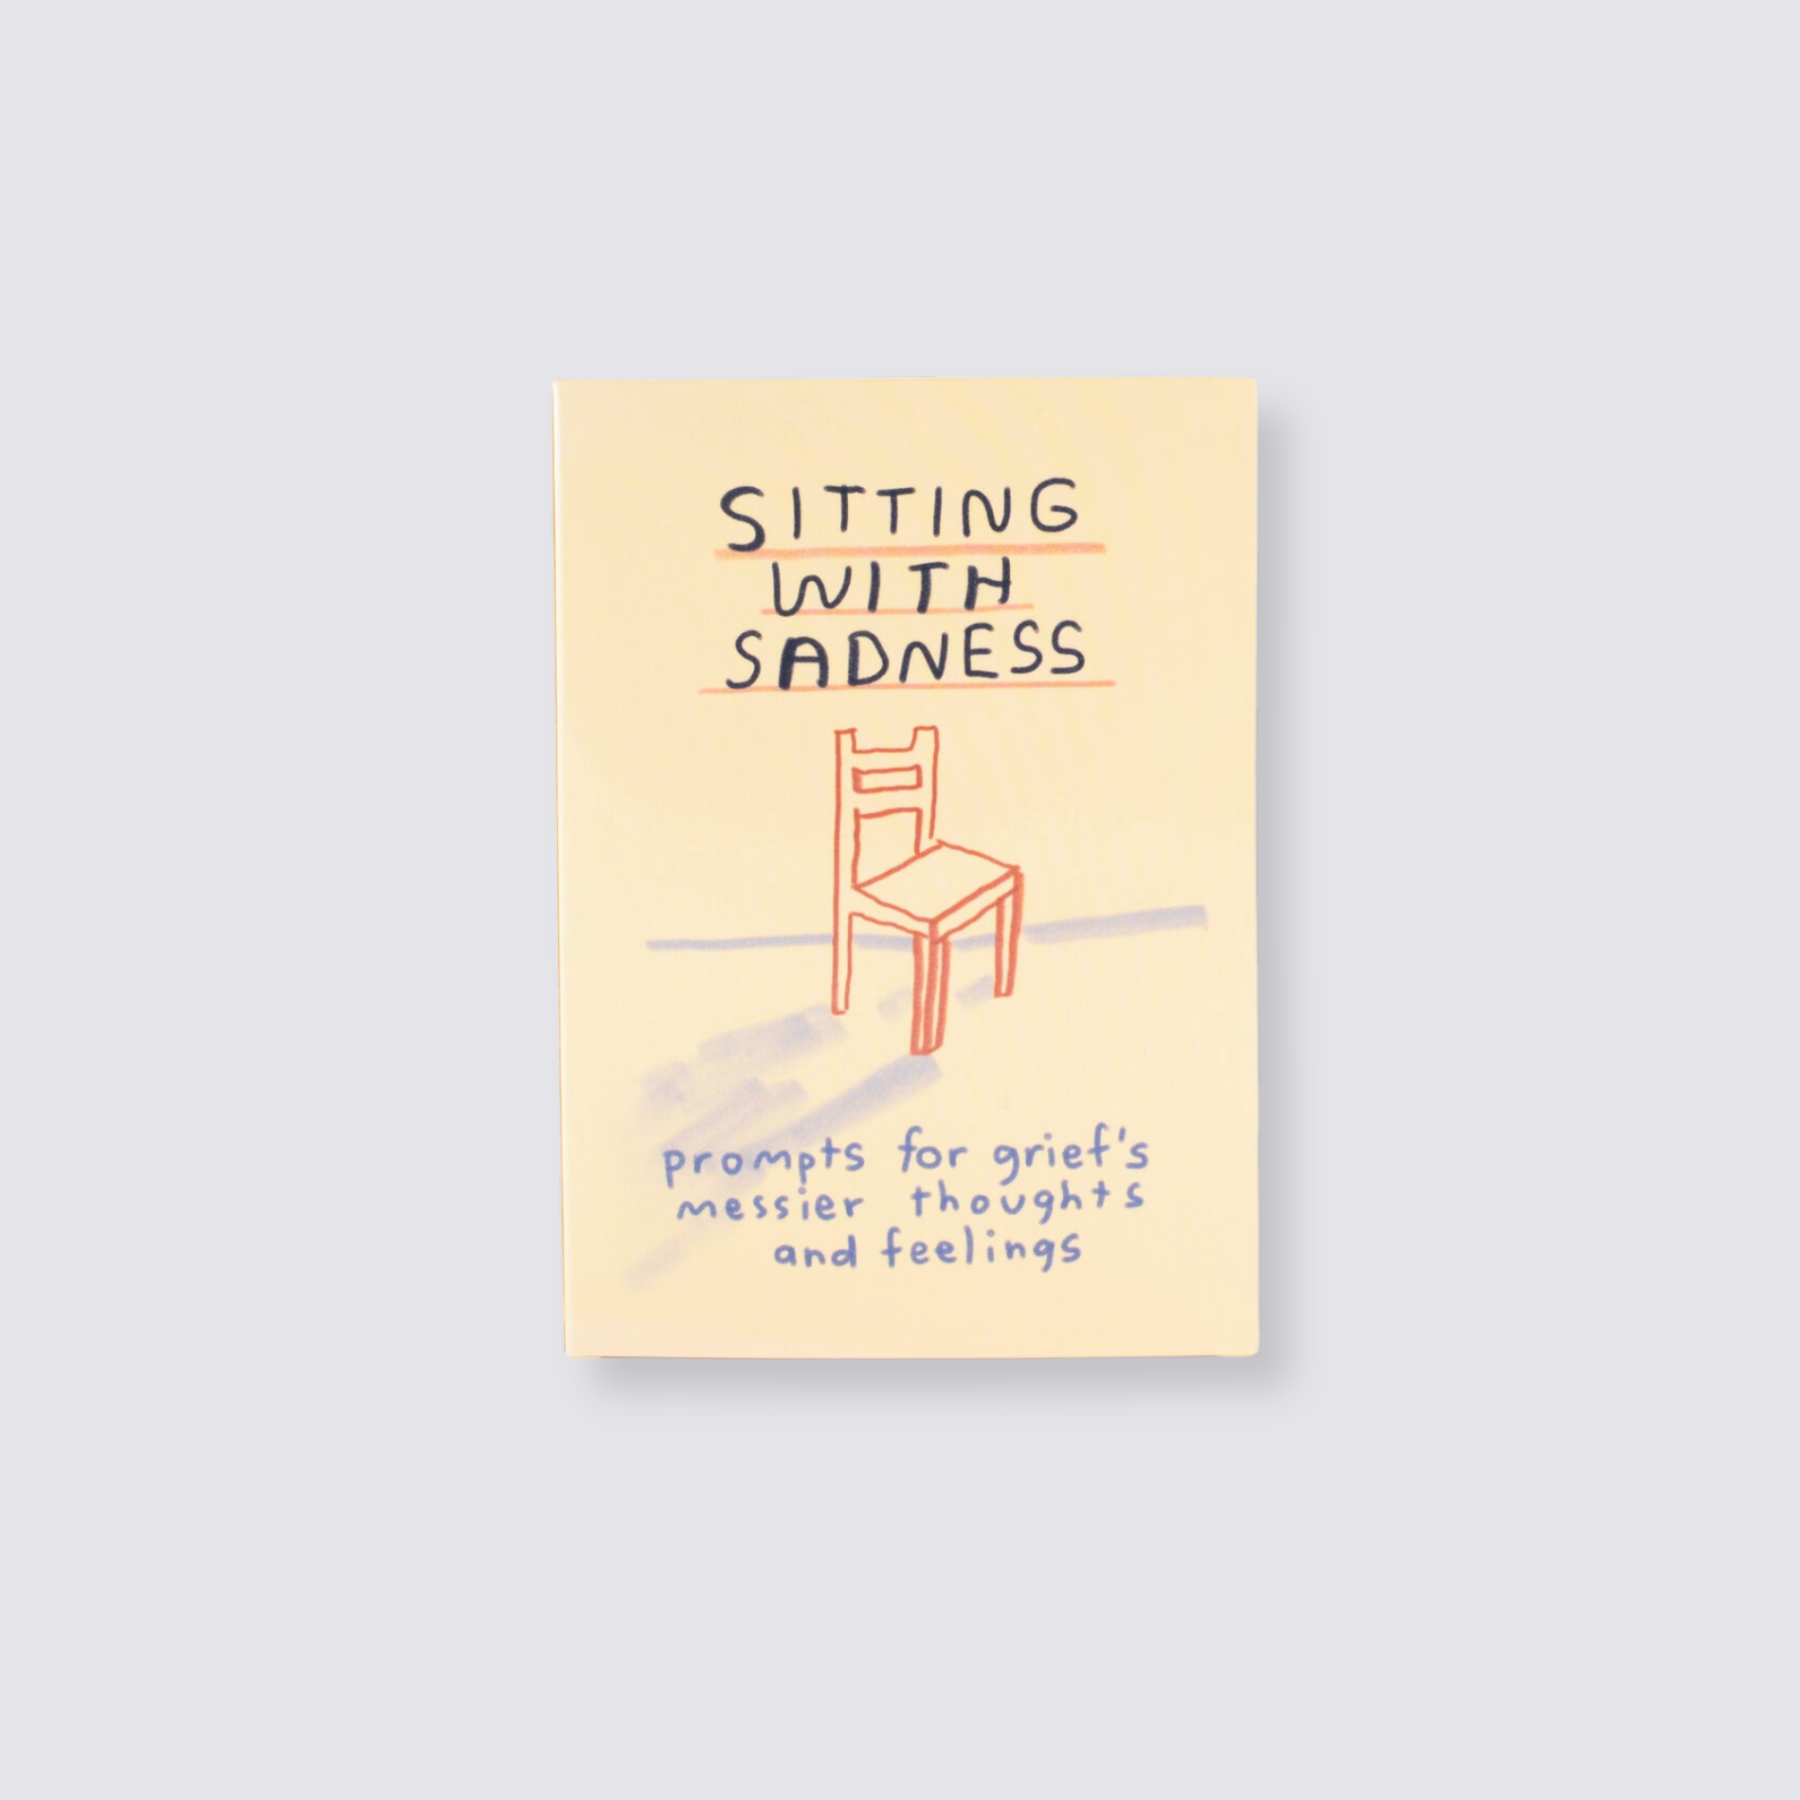 Sitting with sadness prompt cards